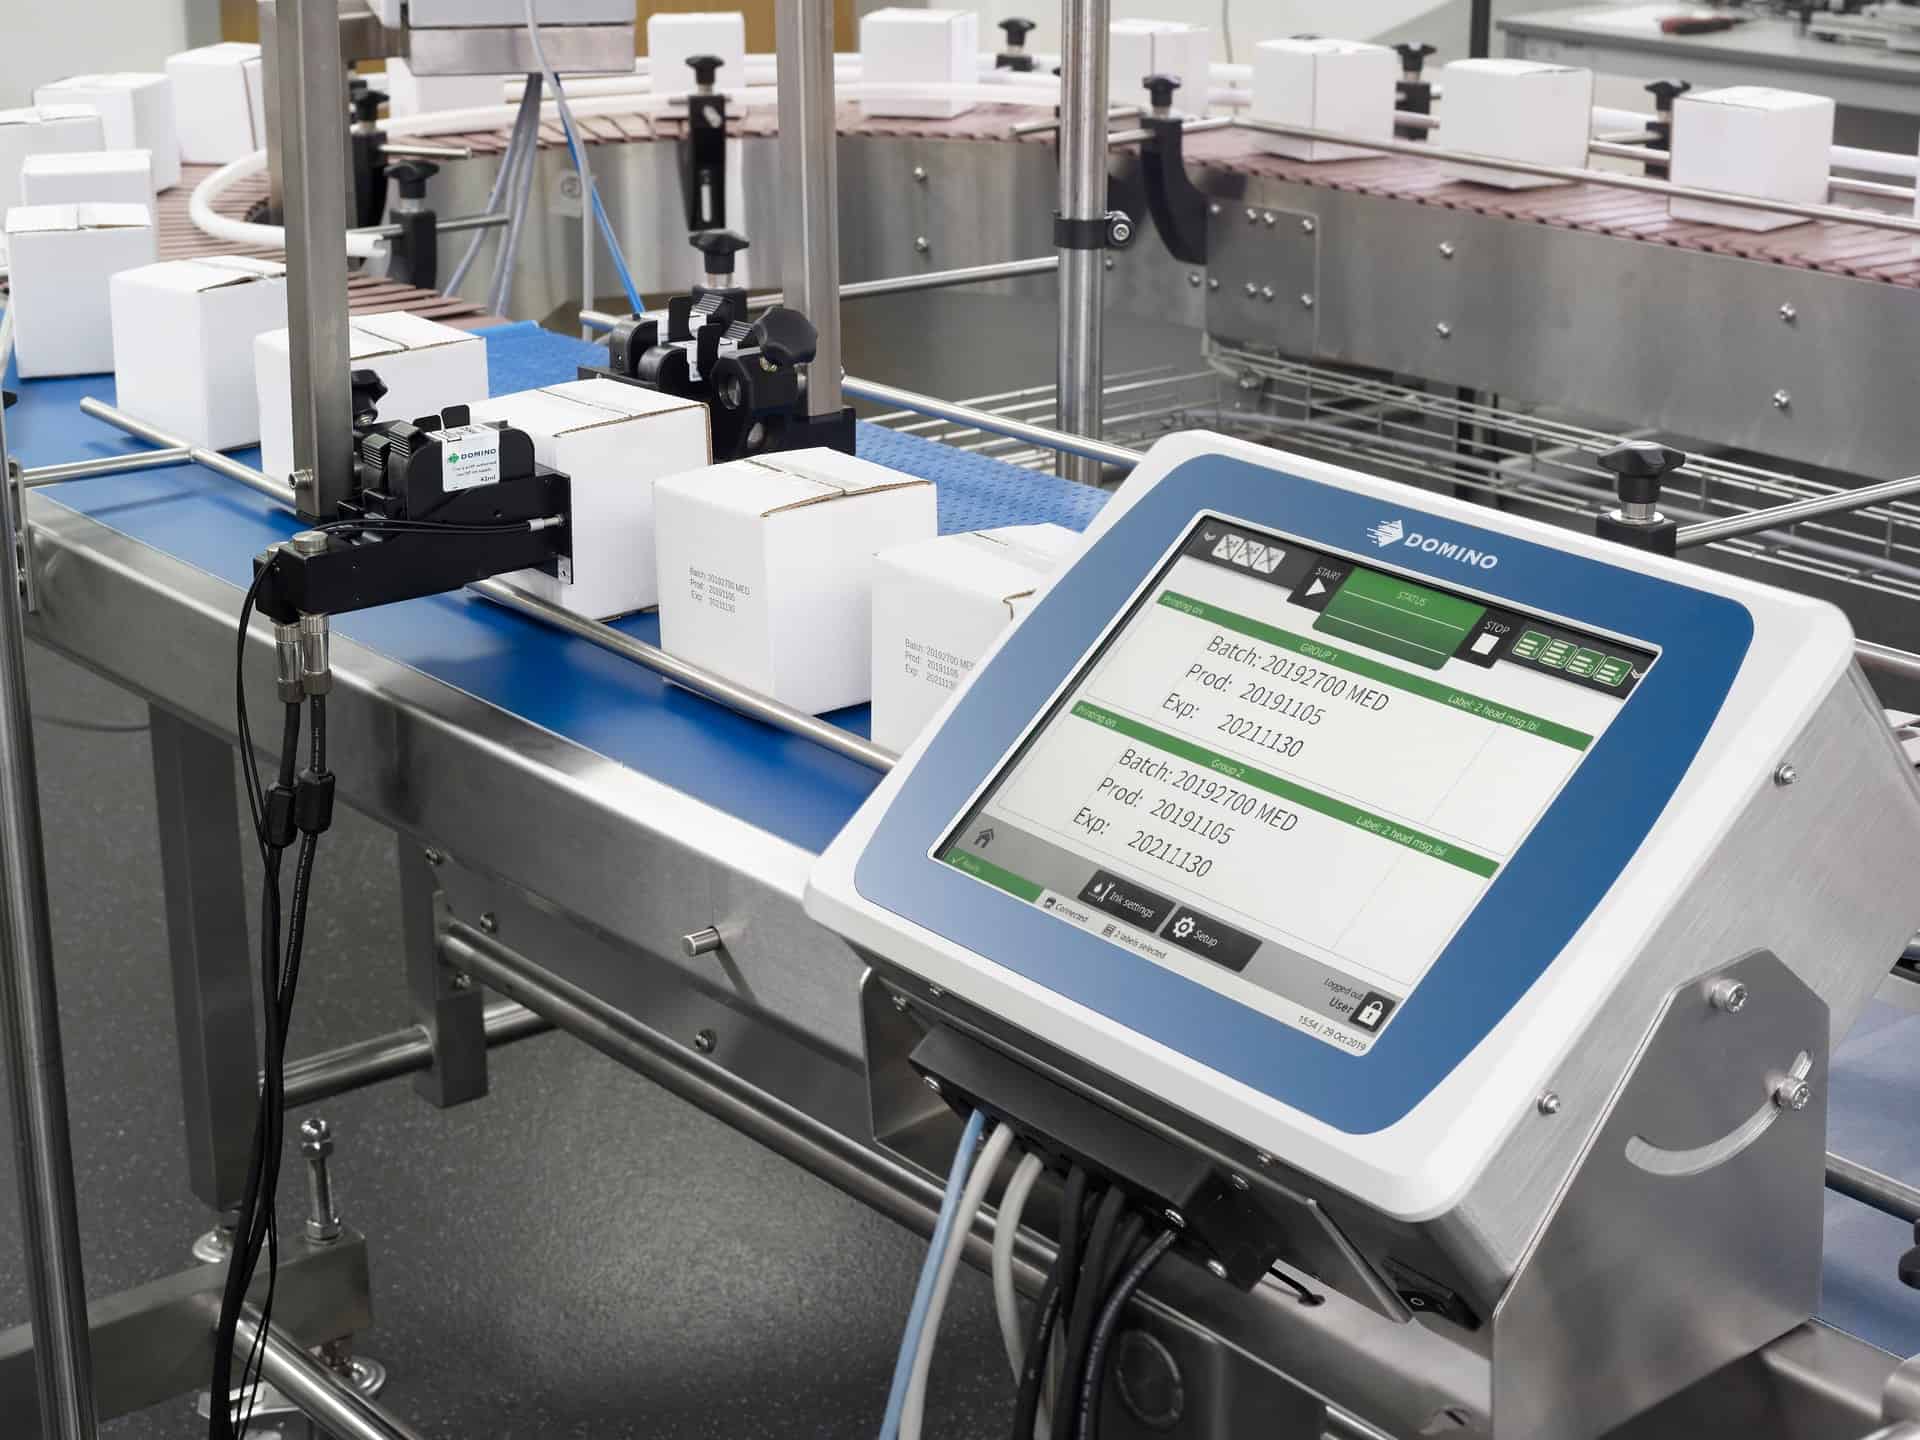 The Domino Gx-Series can enable you to become more productive using Industry 4.0 technology